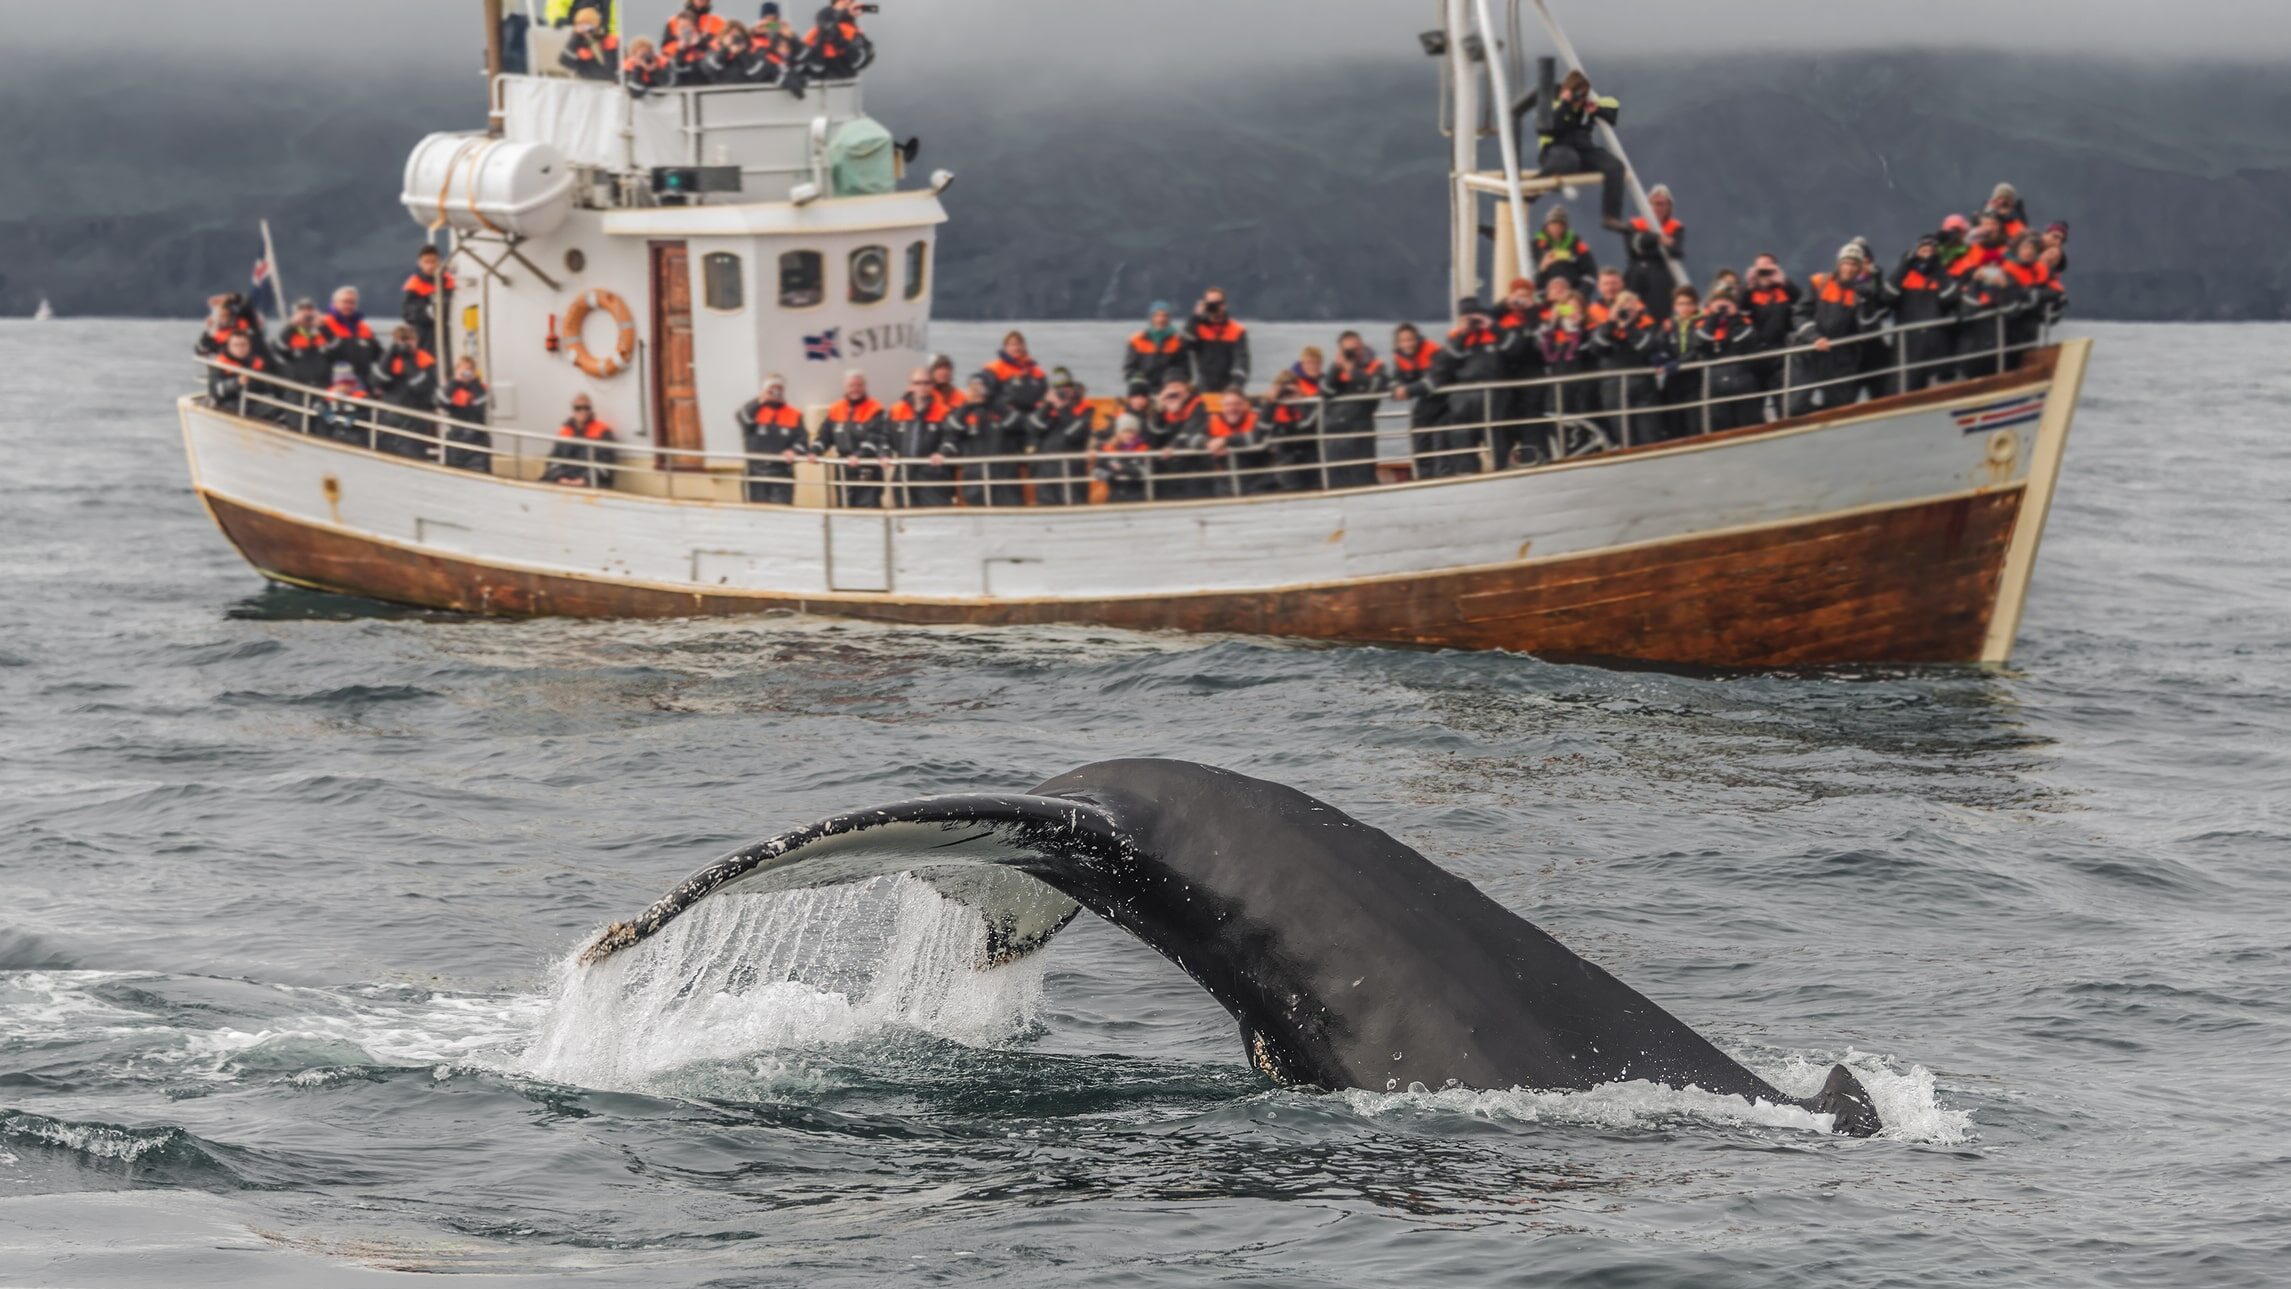 Whale watching safari with humpback whales in Iceland